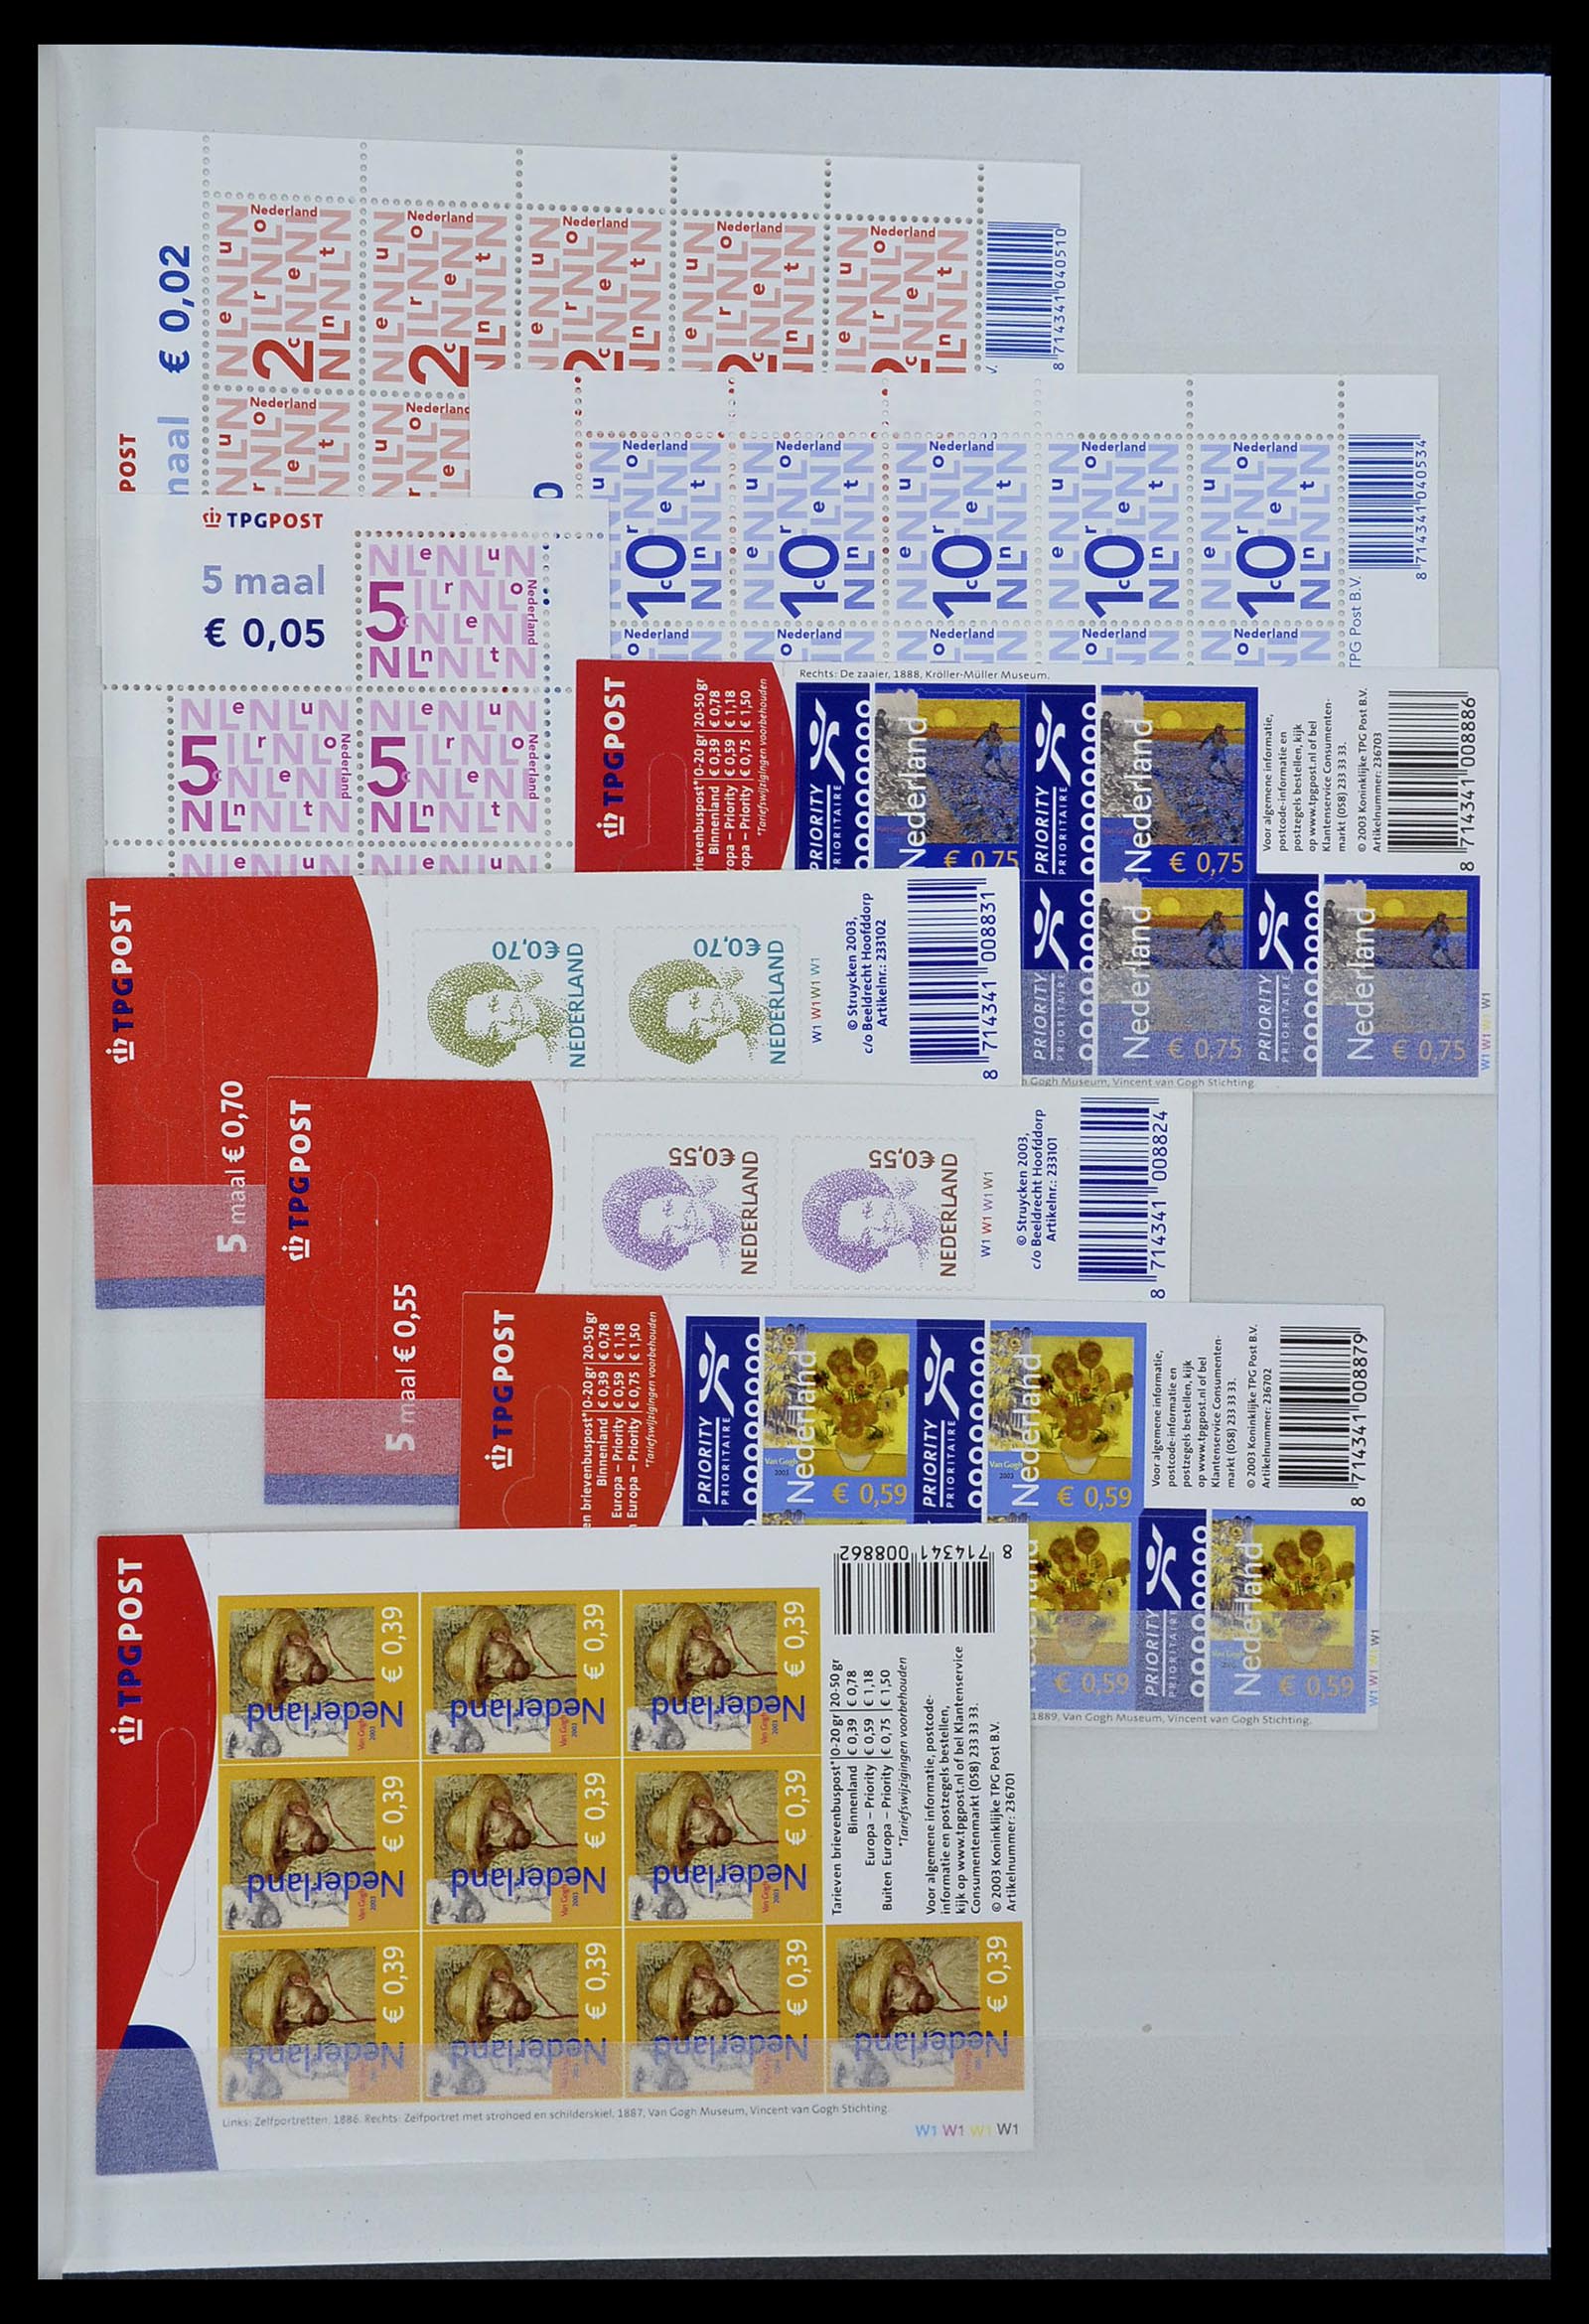 34406 001 - Stamp Collection 34406 Netherlands yearsets 2003-2020!